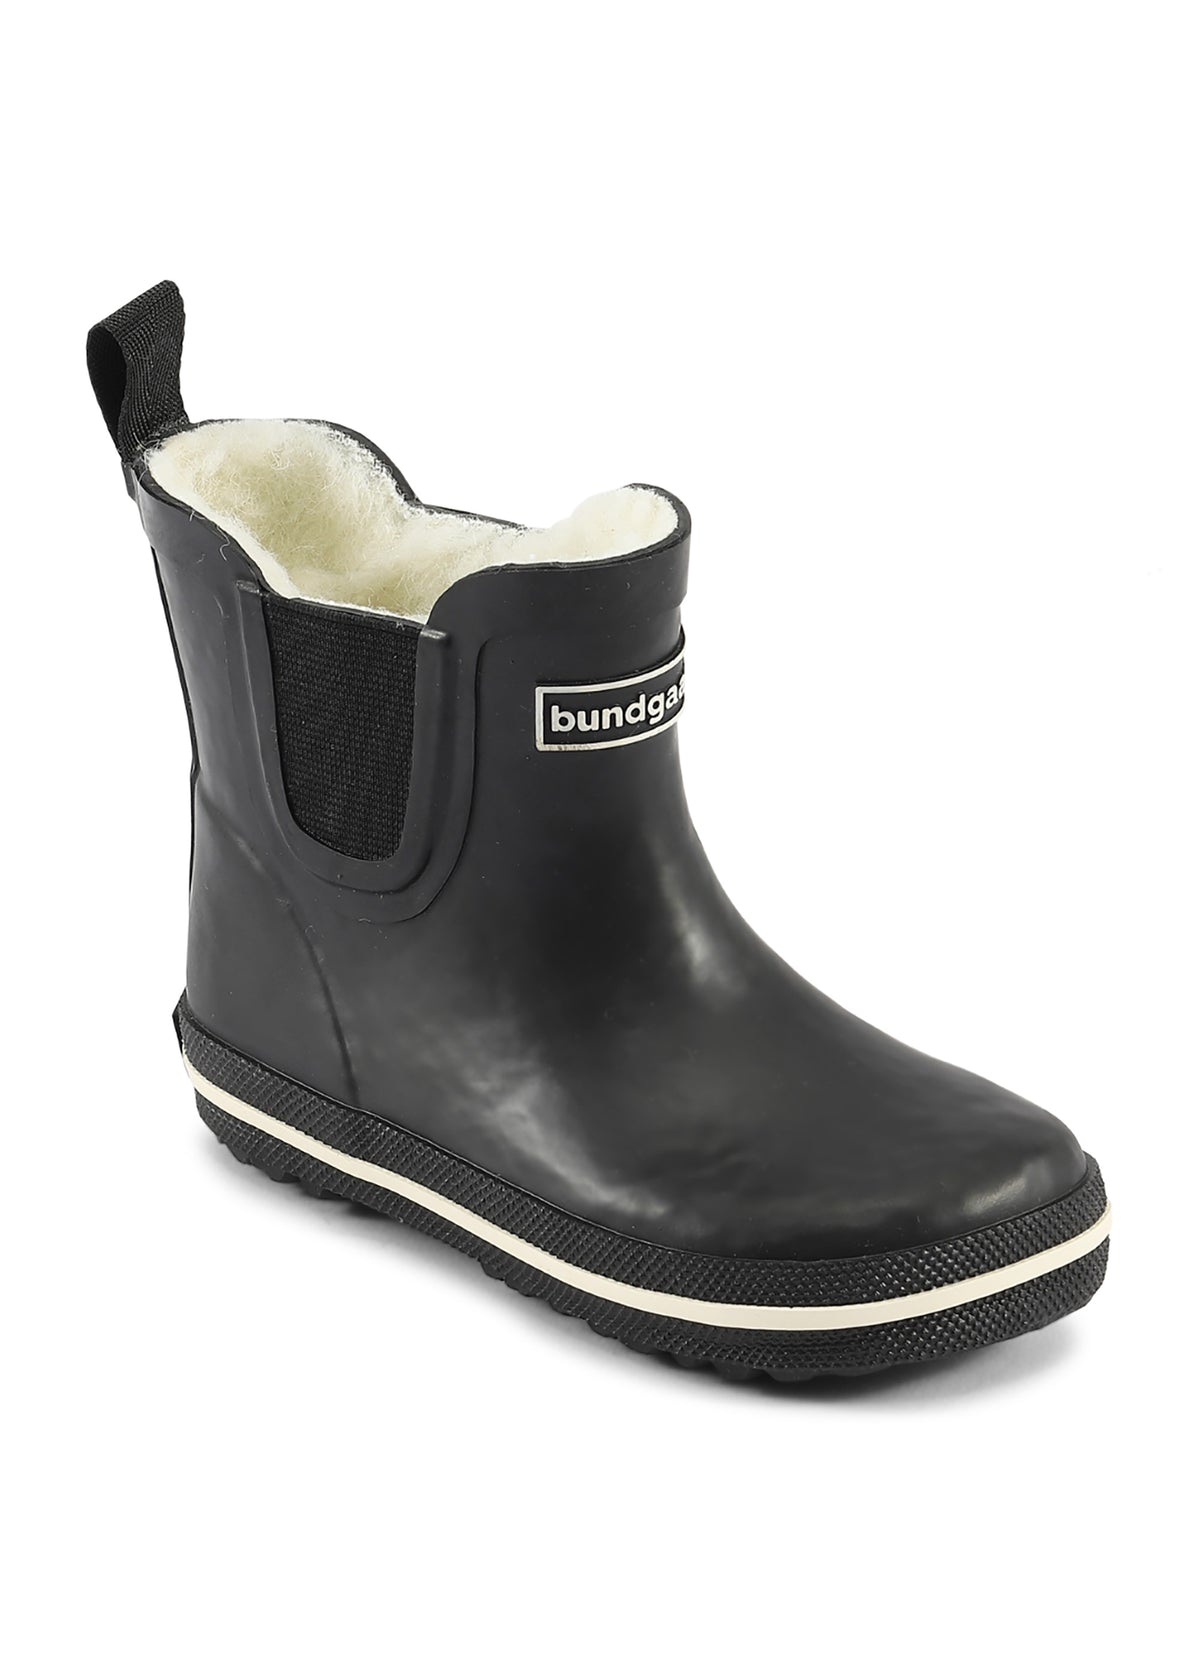 Rubber boots with a warm lining - black, short shaft, Charly Low Warm